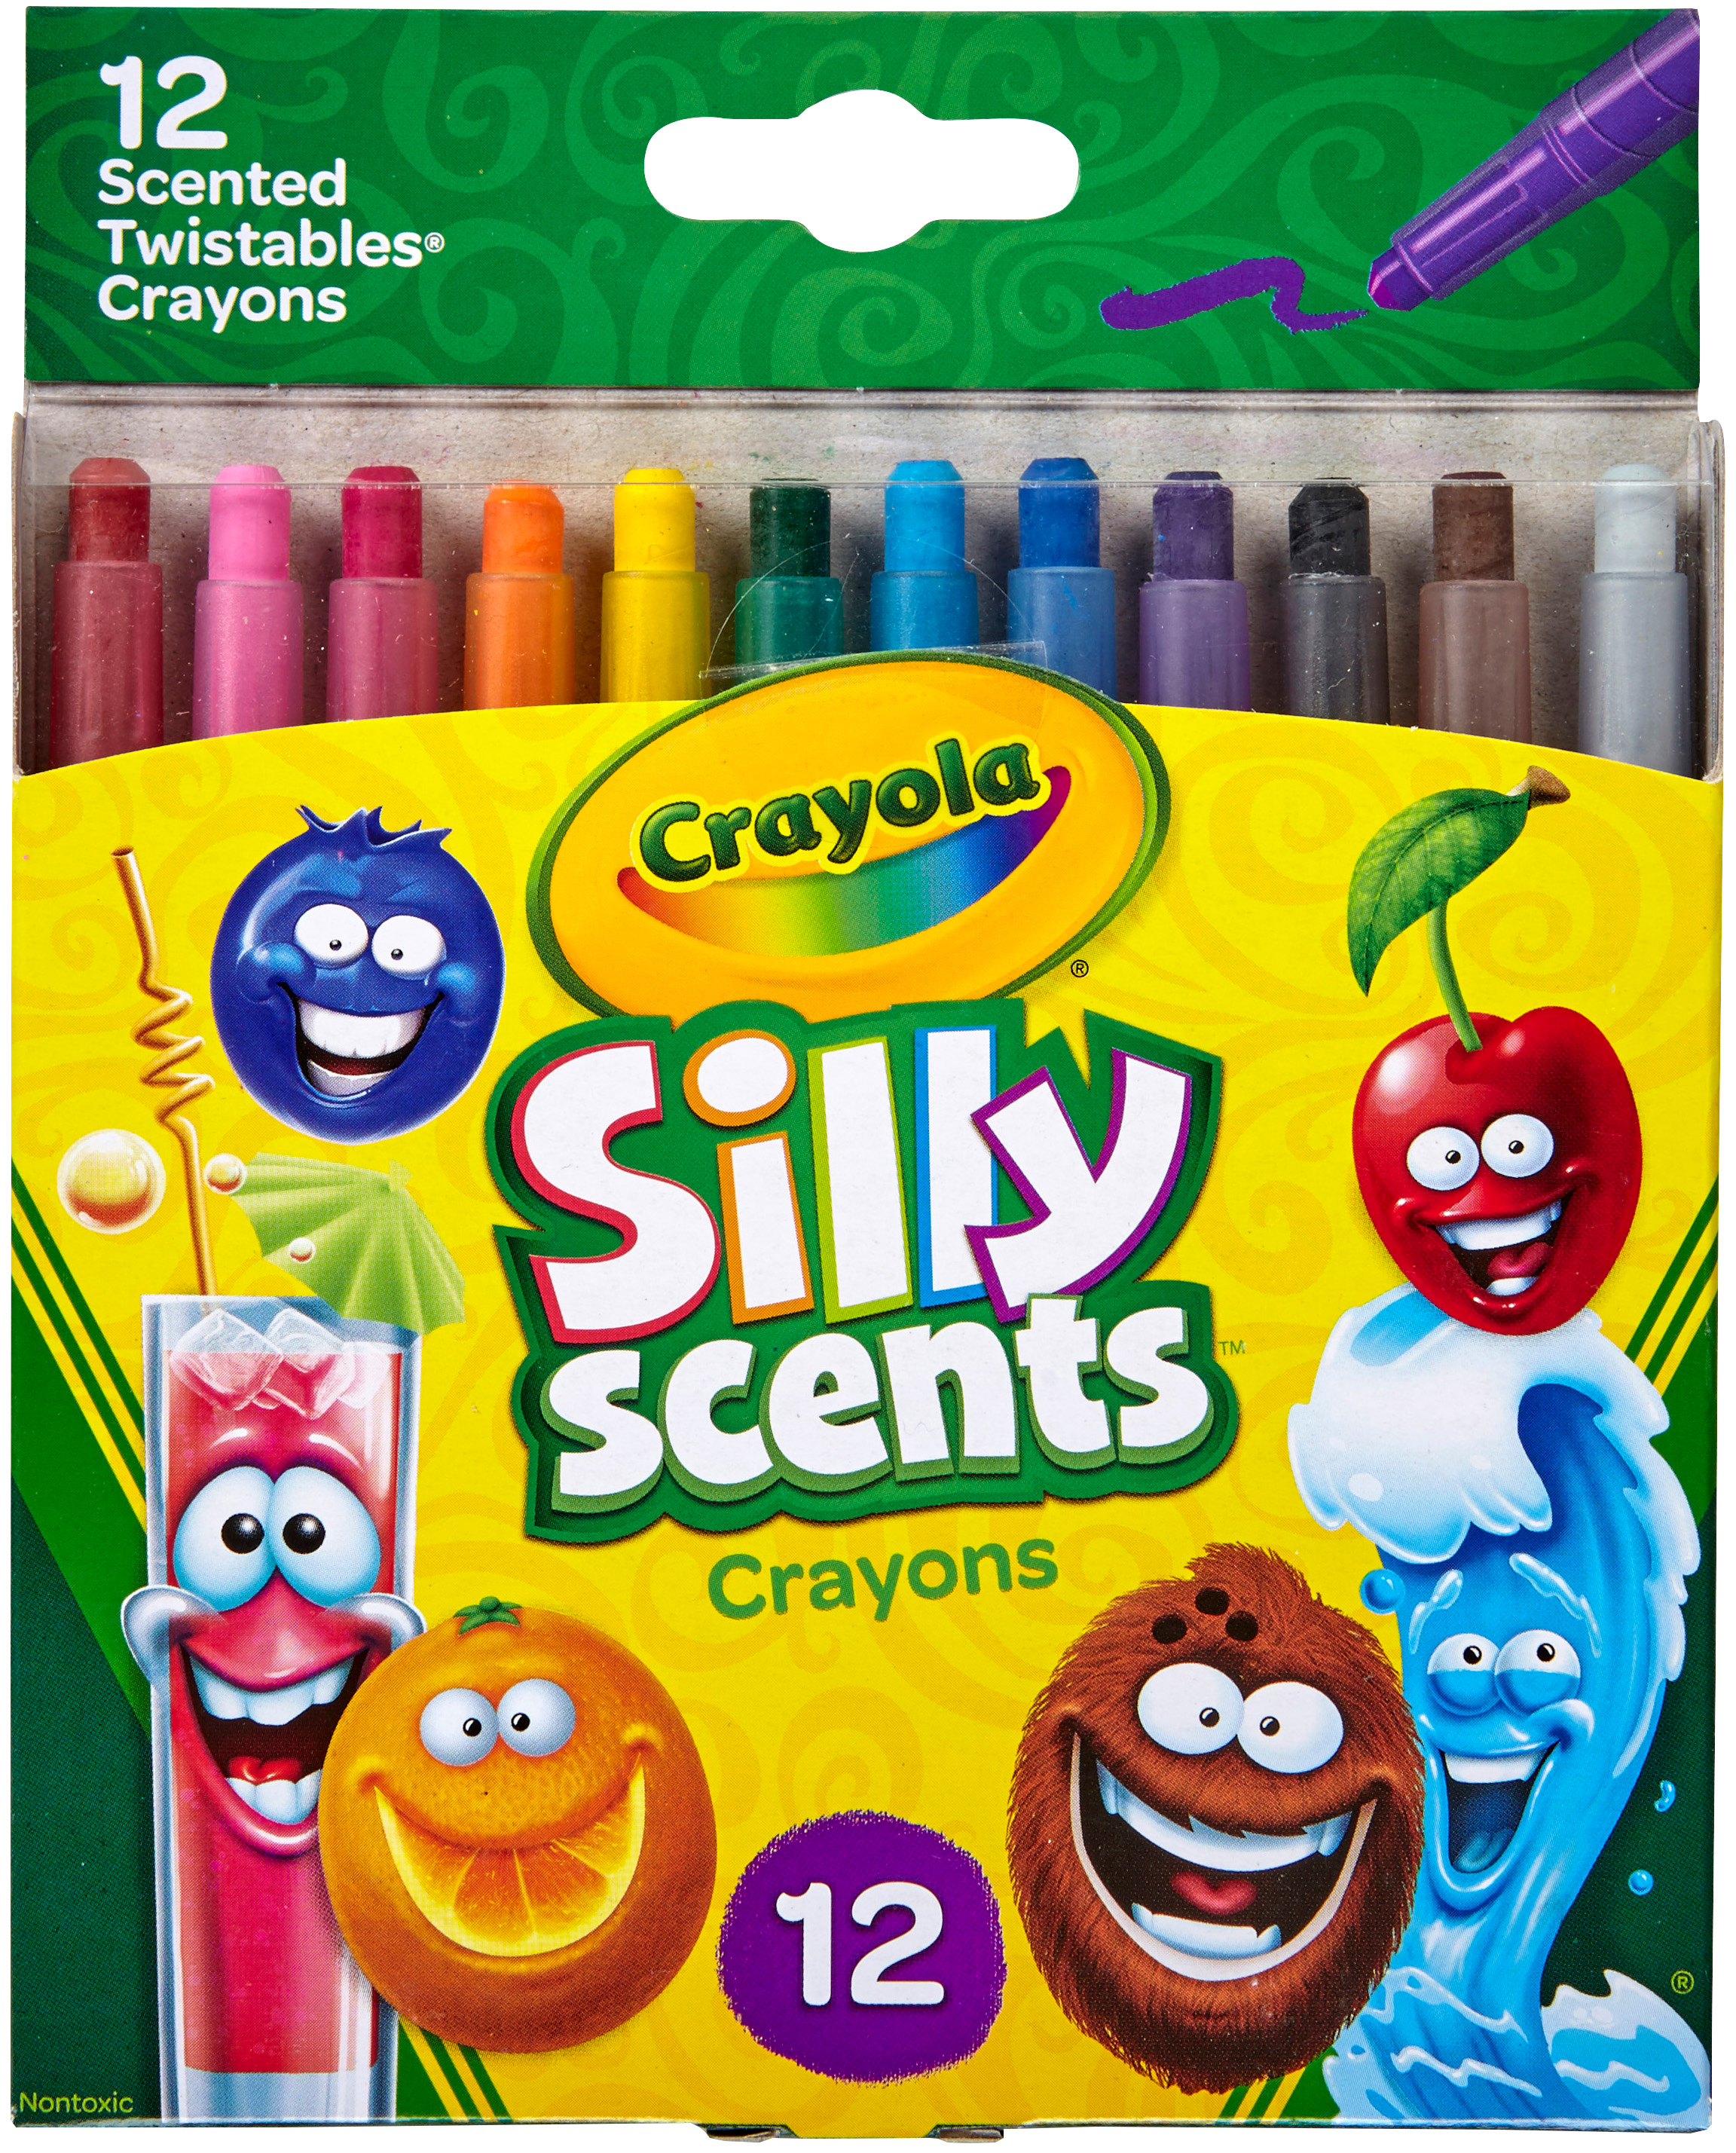 Crayola Silly Scents Twistables Crayons, 12 Count - image 1 of 4